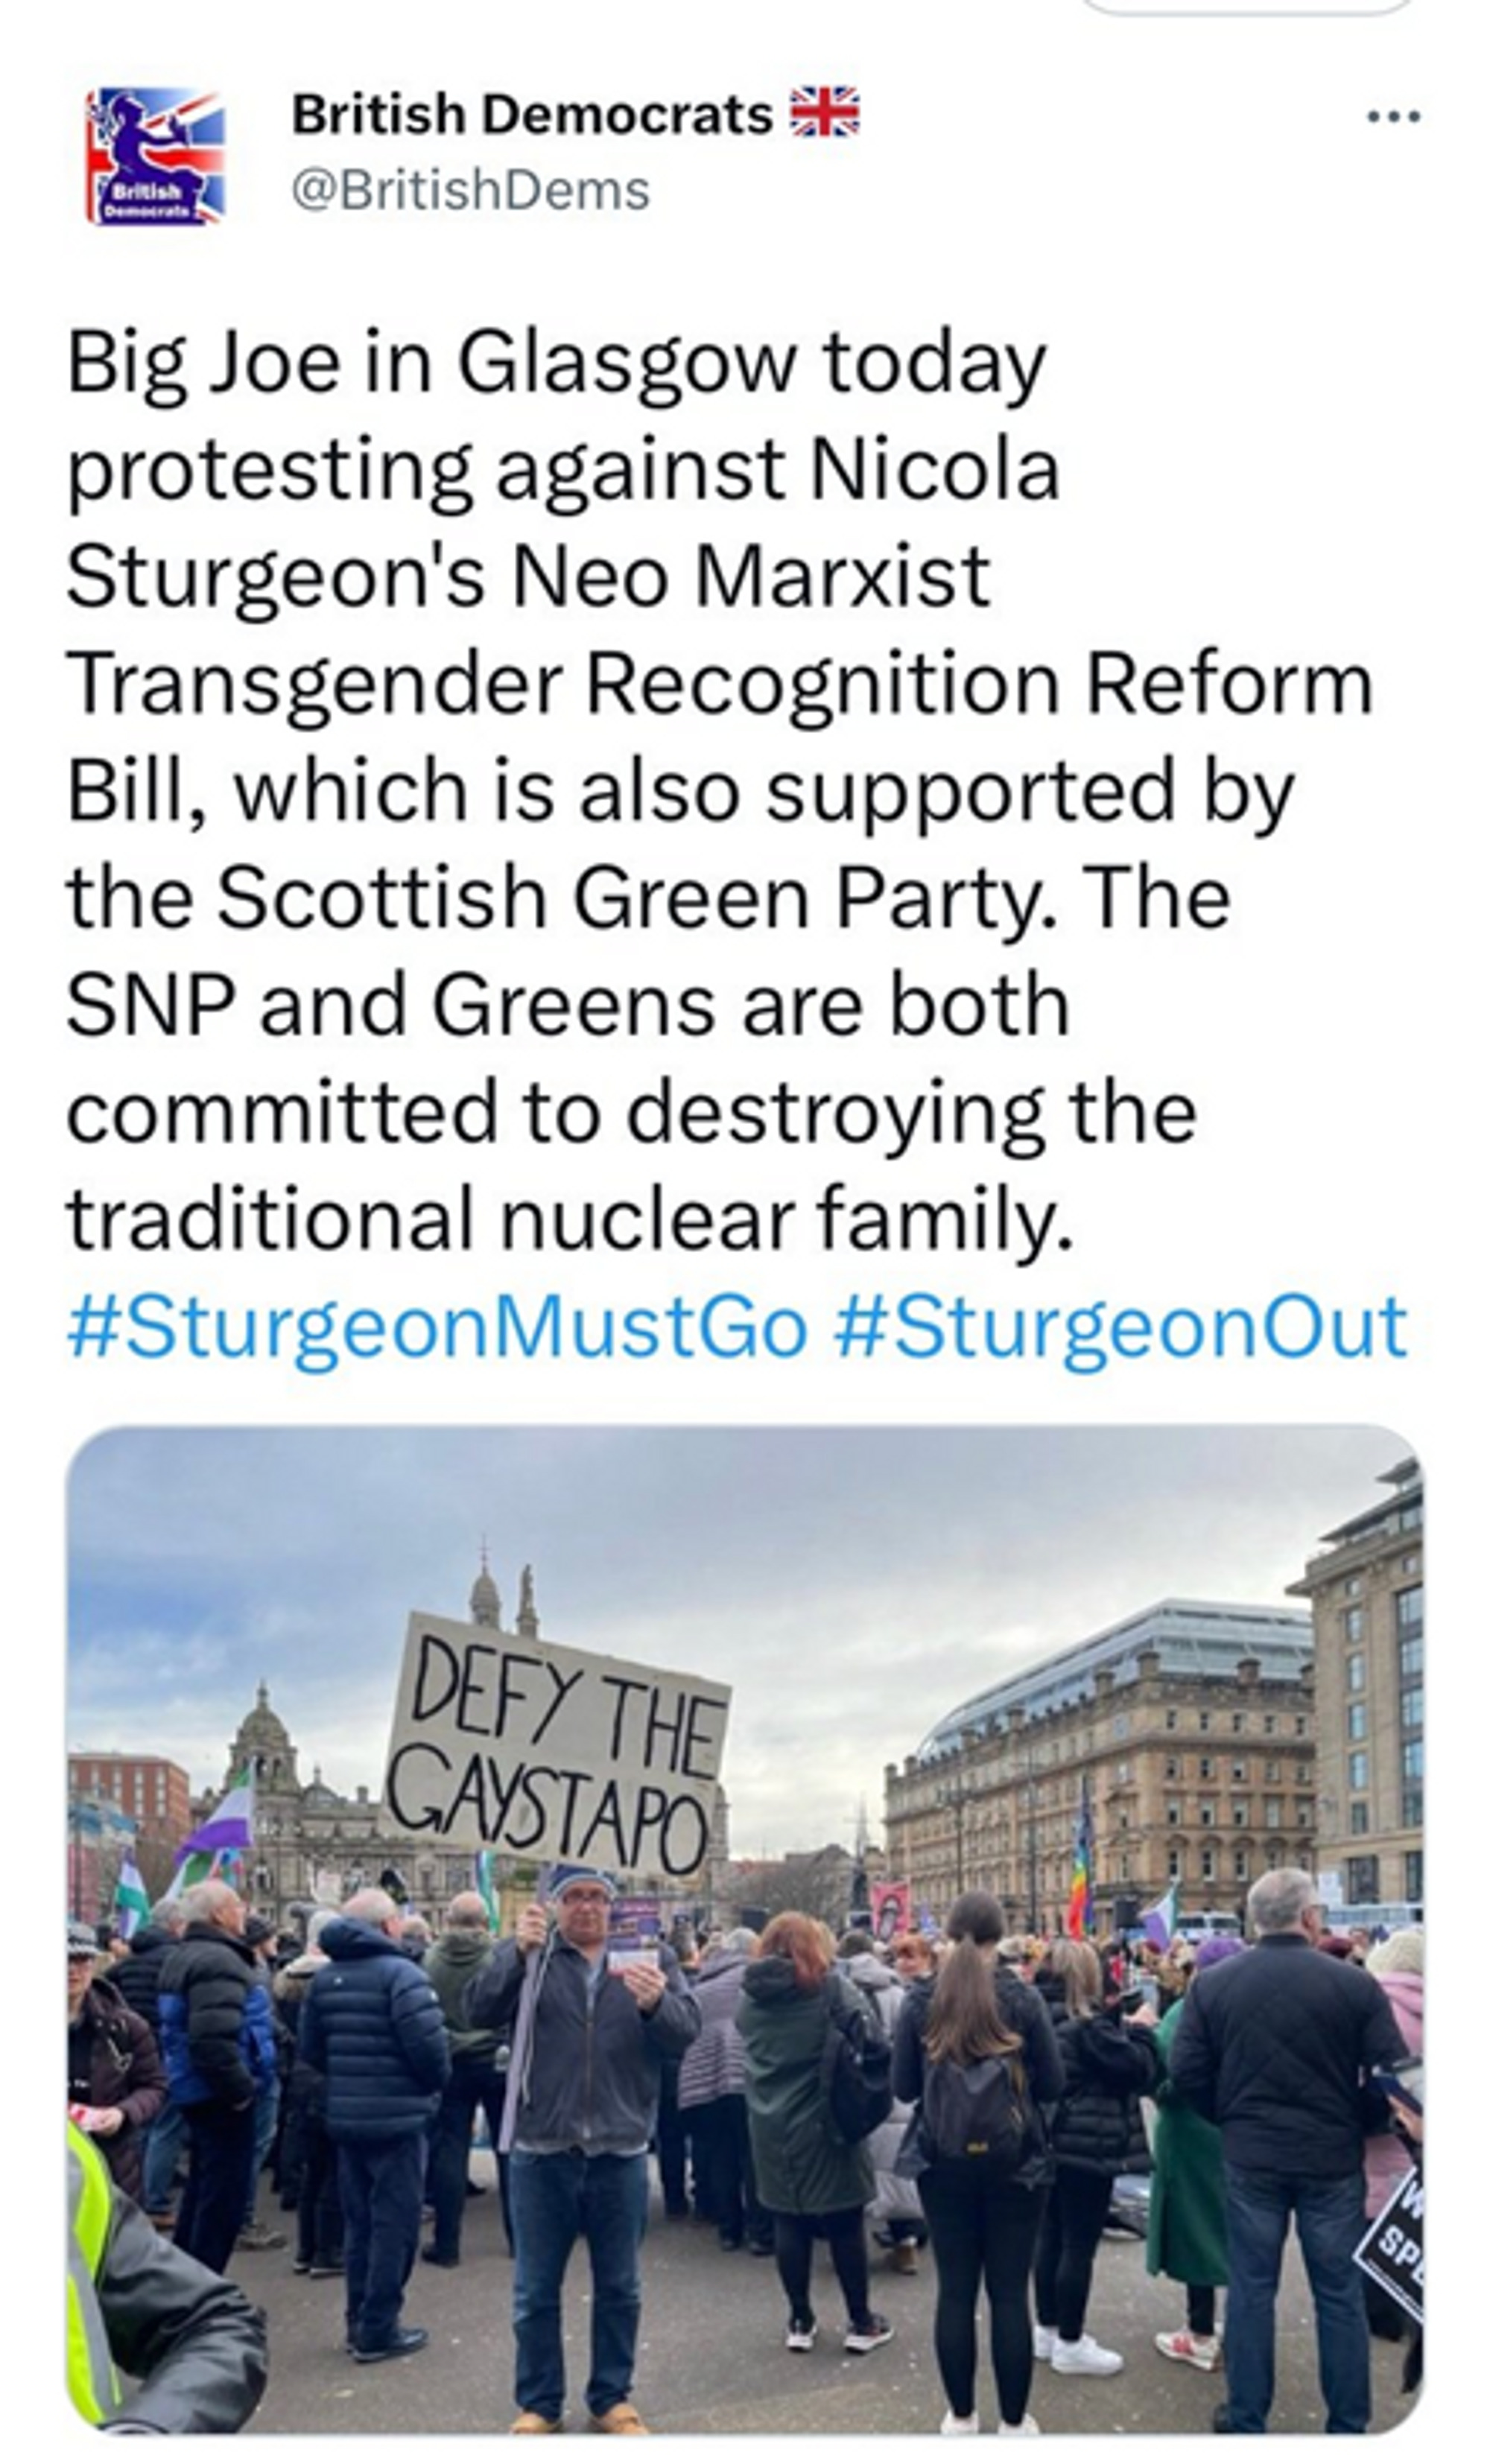 Tweet screenshot: British Democrats tweet: Big Joe in Glasgow today protesting against Nicola Sturgeon's Neo-Marxist Transgender Recognition Reform Bill, which is also supported by the Scottish Green Party. The SNP and the Greens are both committed to destroying the traditional nuclear family. #SturgeonMustGo #SturgeonOut